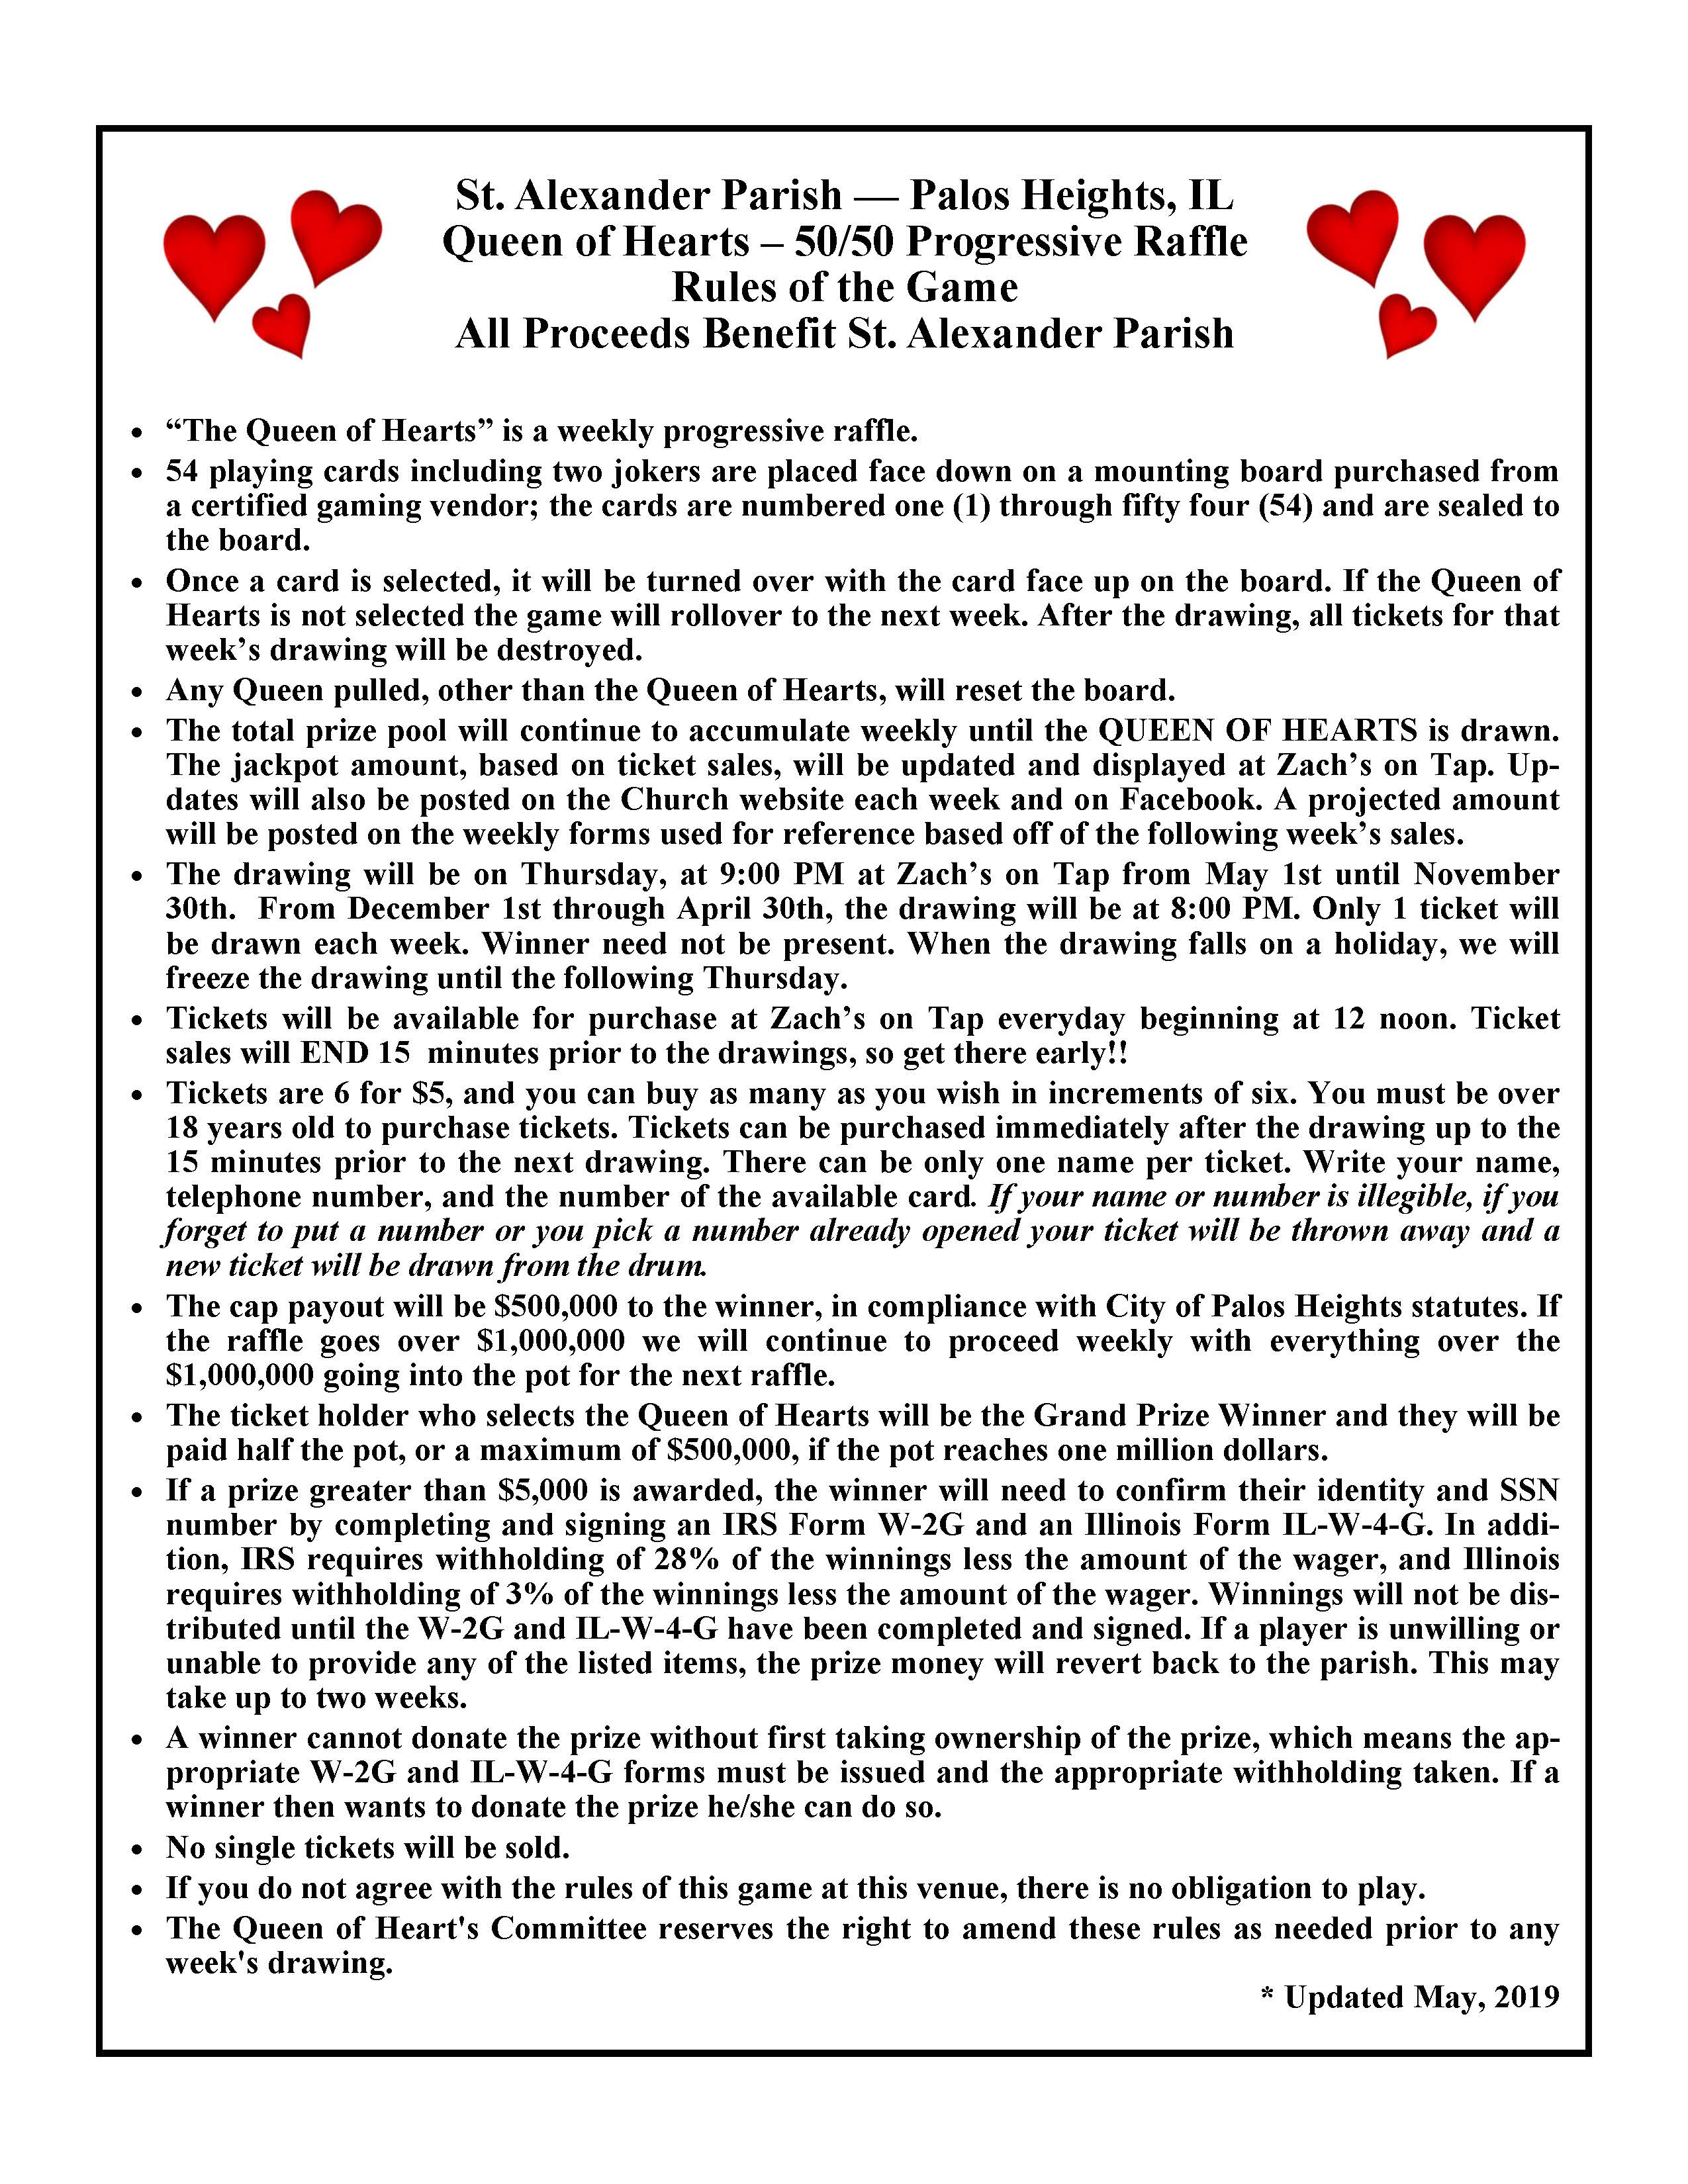 rules and regulations of the game of hearts cards